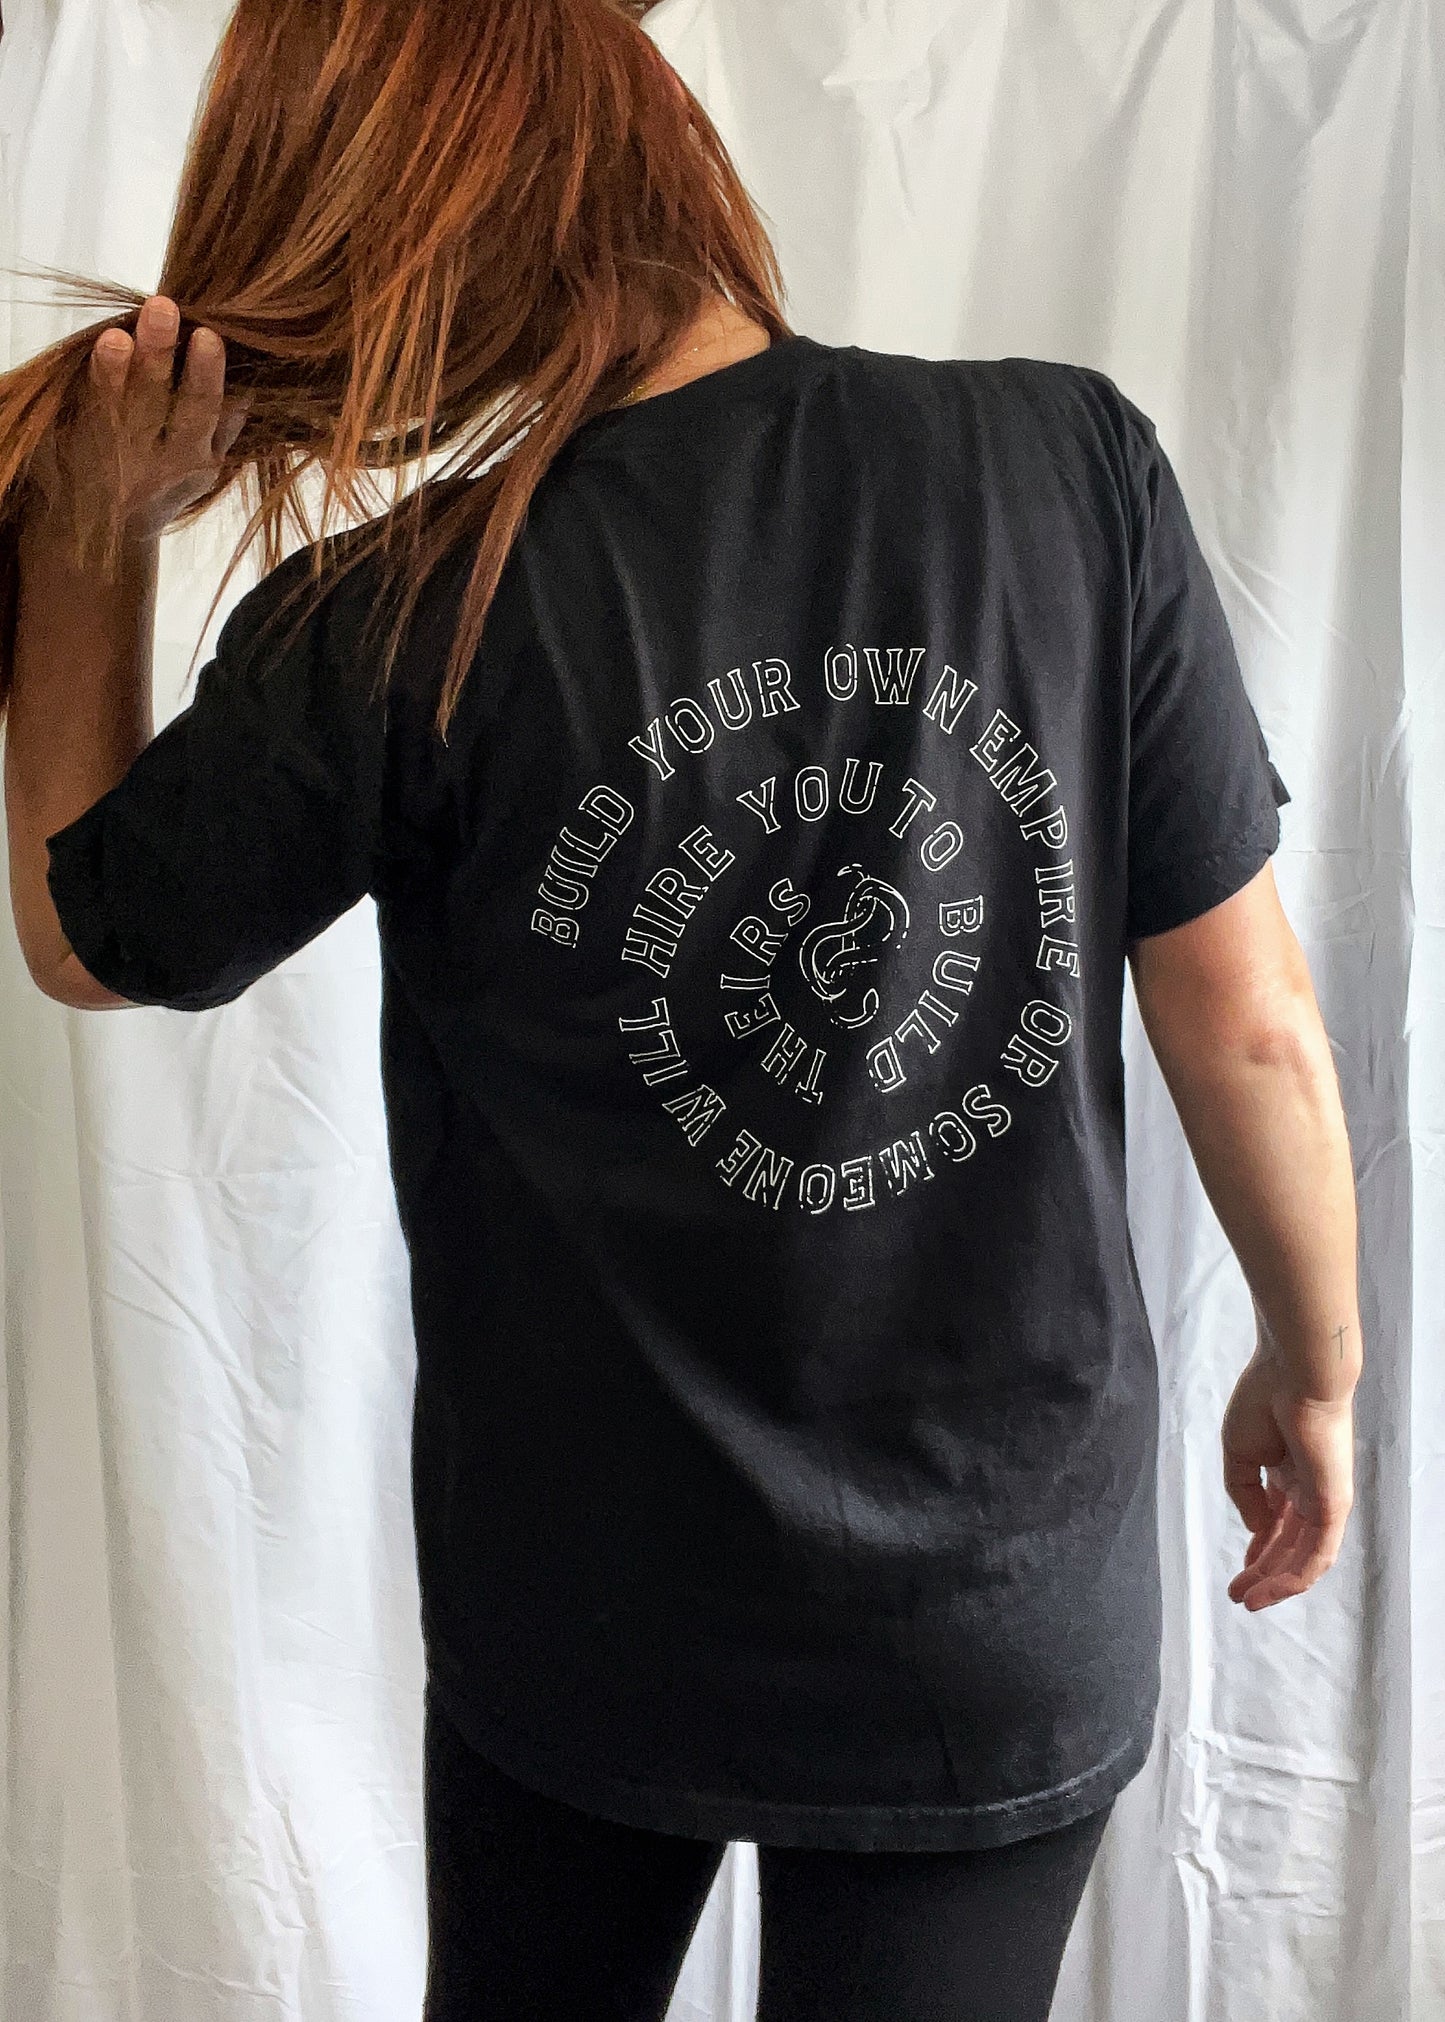 BUILD YOUR OWN EMPIRE - Black Comfort Colors Short Sleeve